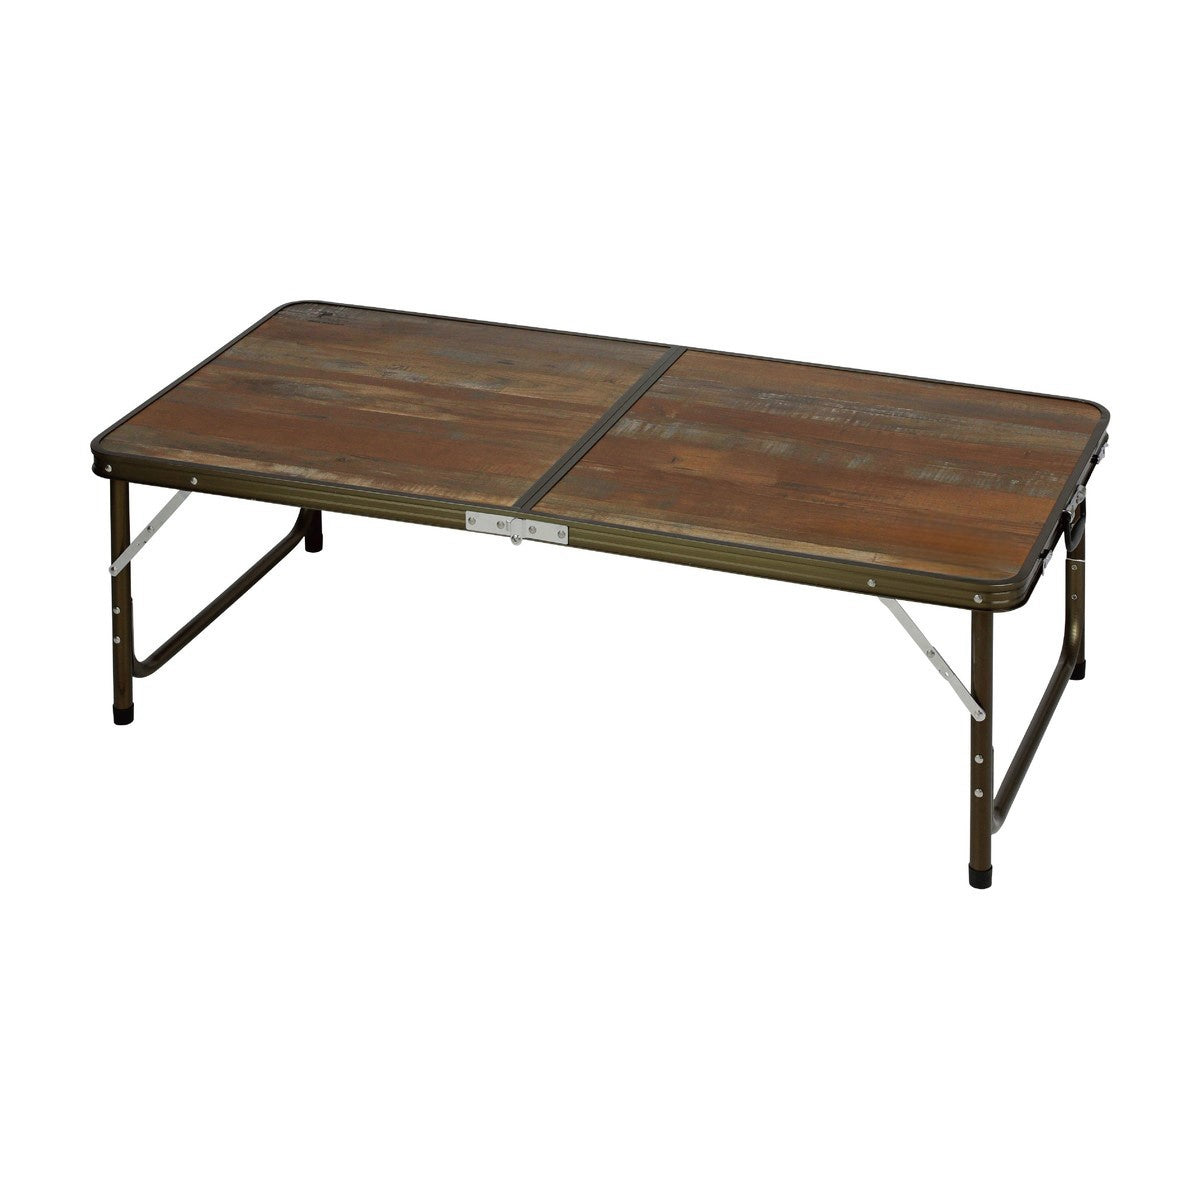 Bistro folding table 120 x 60 <with 4 height adjustments> - E571.